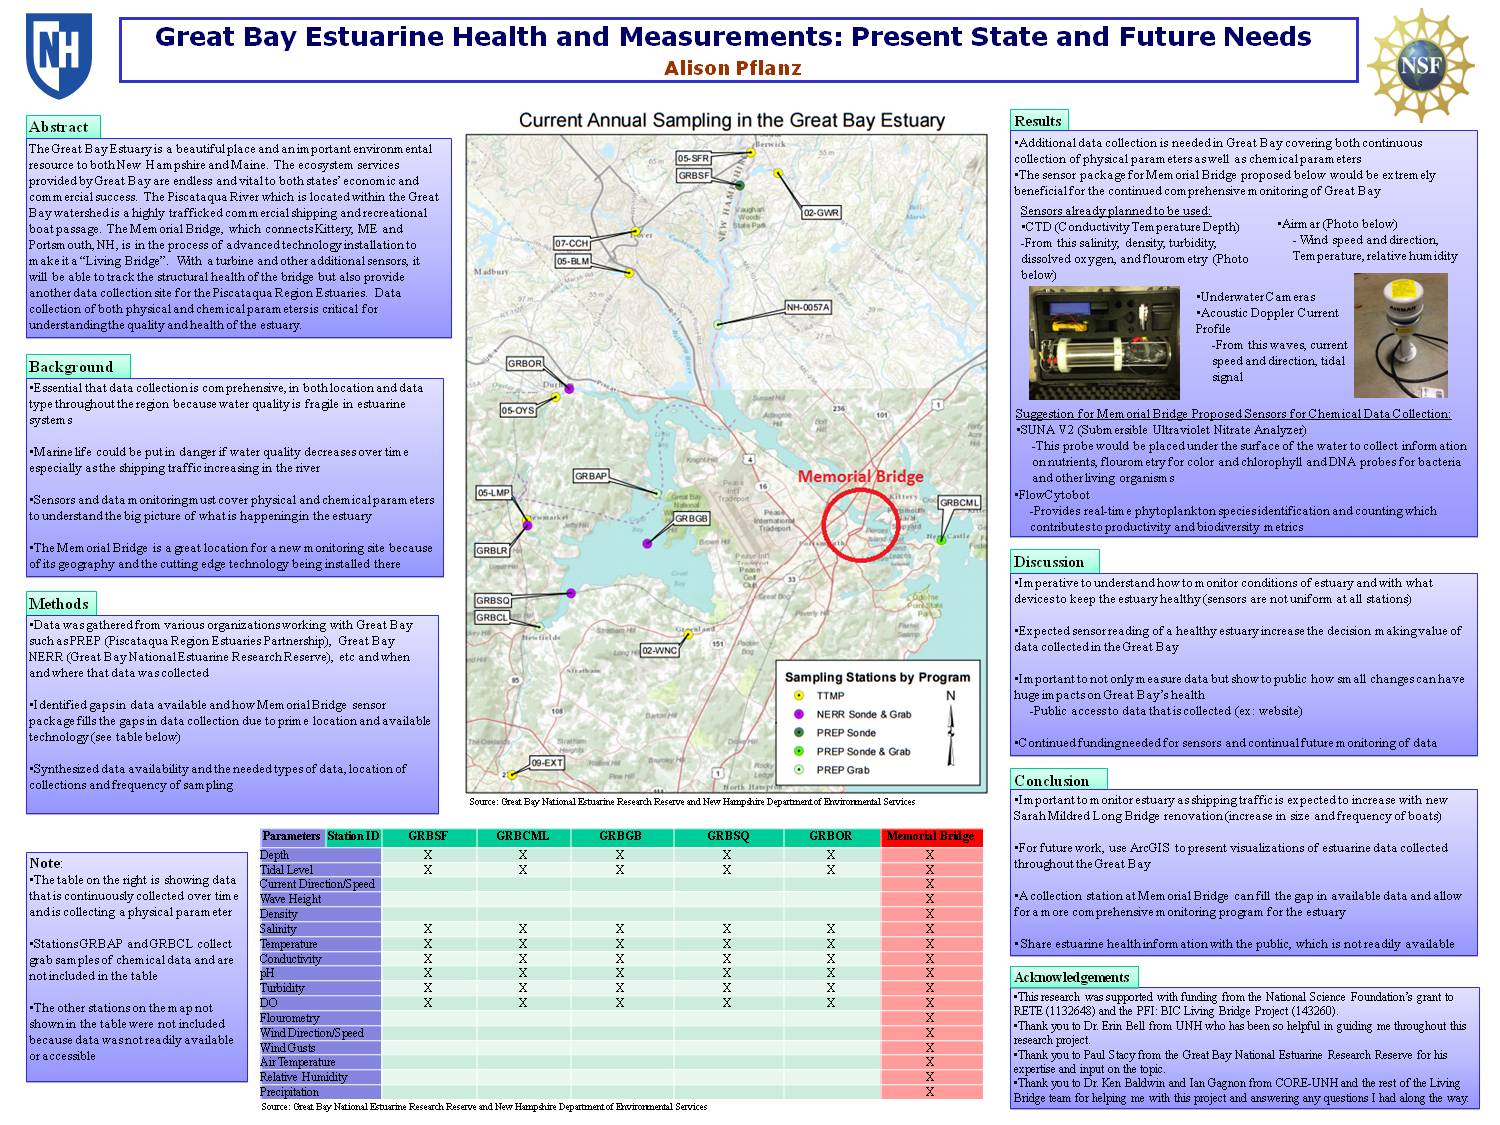 Great Bay Estuarine Health And Measurements: Present State And Future Needs by arm85